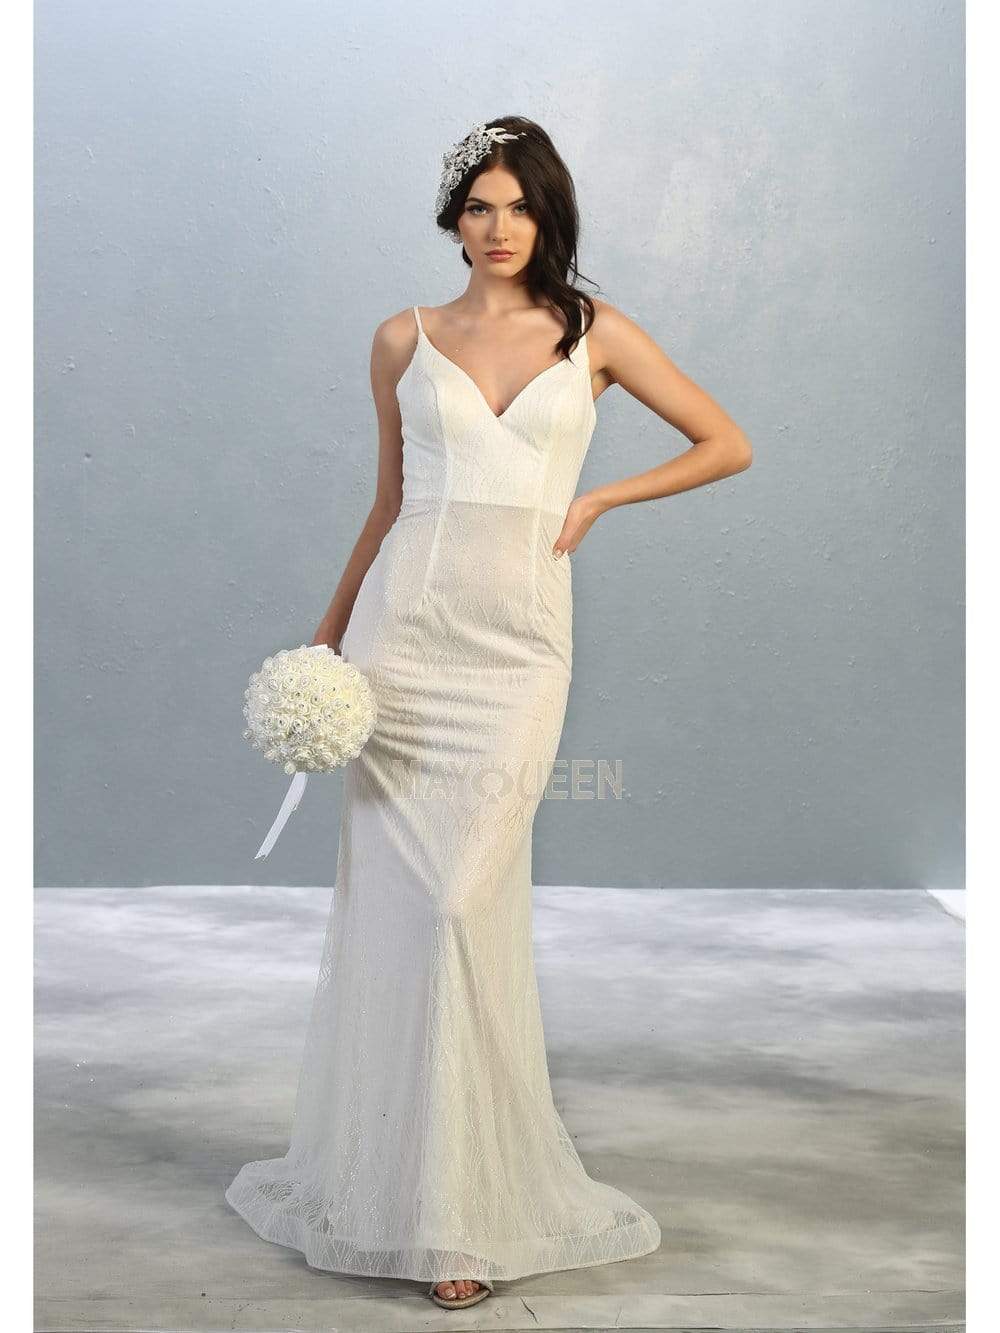 May Queen - MQ1790 Embellished Plunging V-neck Trumpet Dress Prom Dresses 4 / Ivory